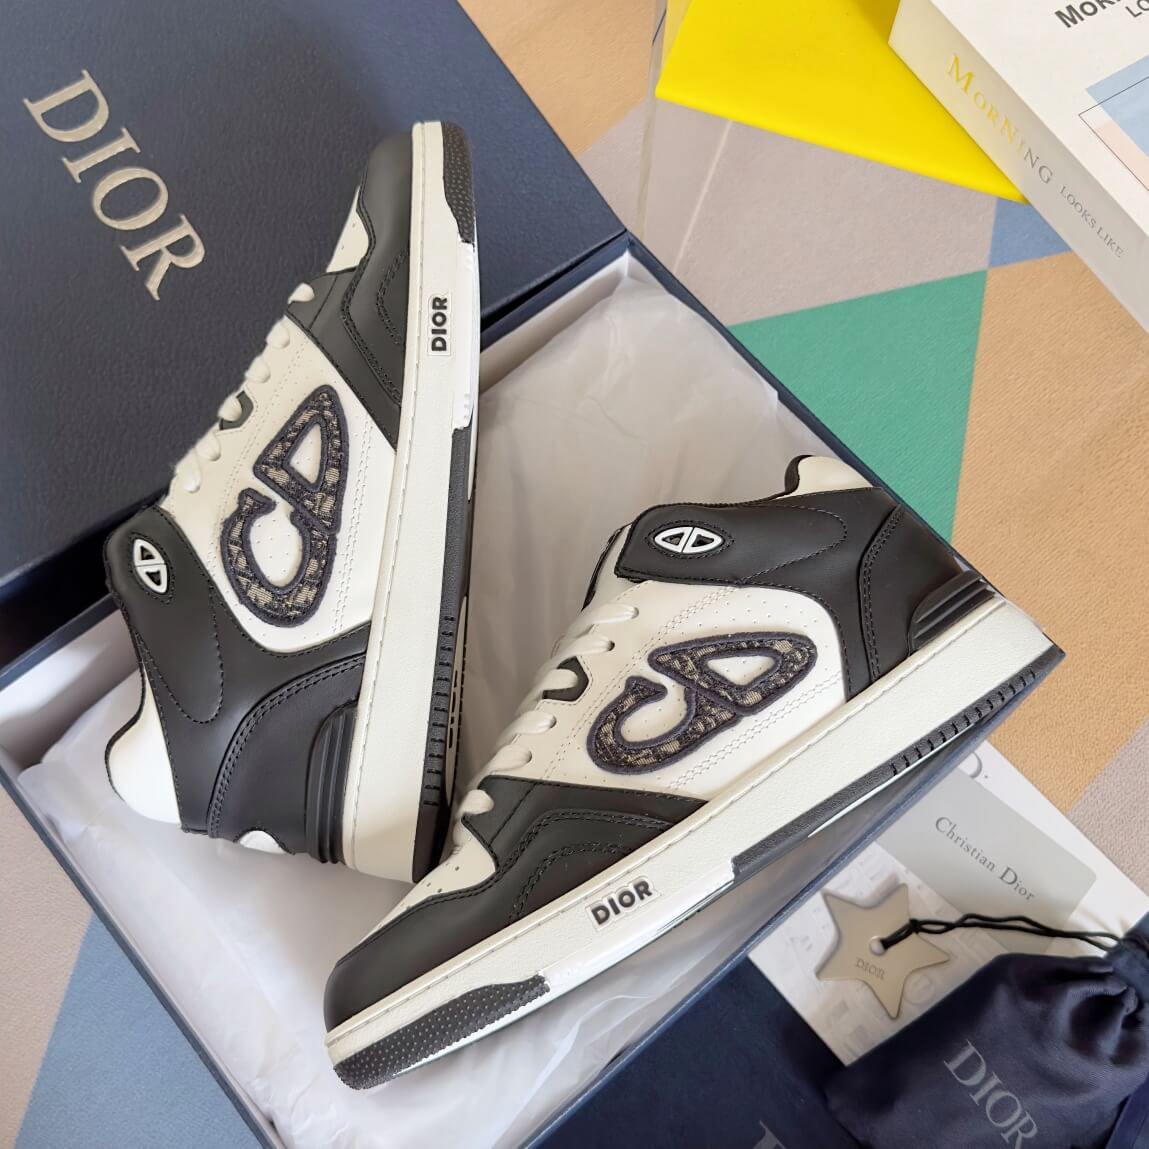 Giày Dior B57 Mid Top Sneaker Black And White Like Auth